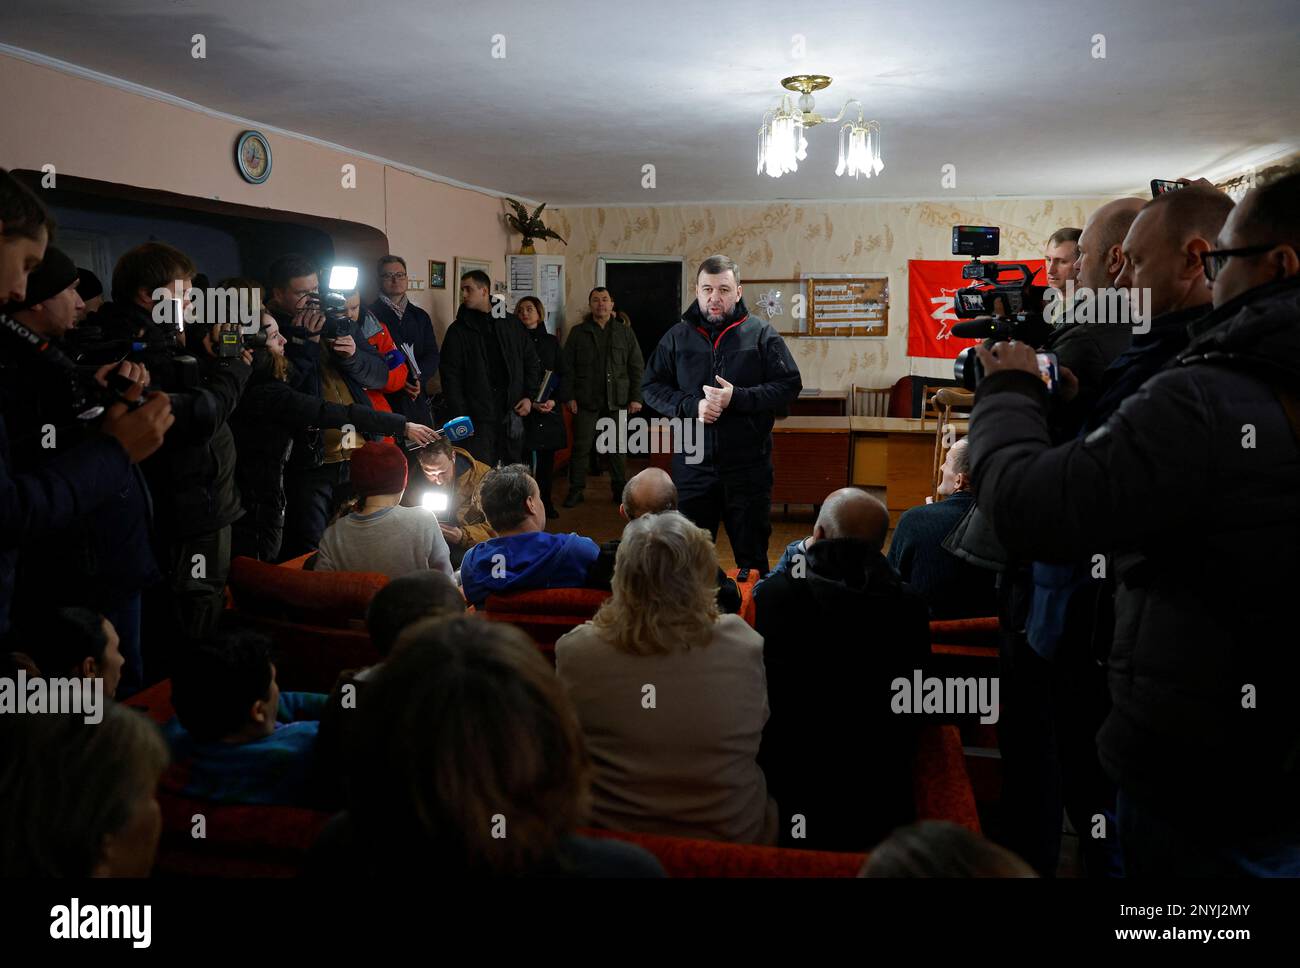 Denis Pushilin, Moscow-installed acting leader of the Russian-controlled parts of Ukraine's Donetsk region, meets with civilians evacuated from Bakhmut district in the course of Russia-Ukraine conflict, at a temporary accommodation centre in a local dormitory in Shakhtarsk (Shakhtyorsk) in the Donetsk Region, Russian-controlled Ukraine, March 2, 2023. REUTERS/Alexander Ermochenko Stock Photo